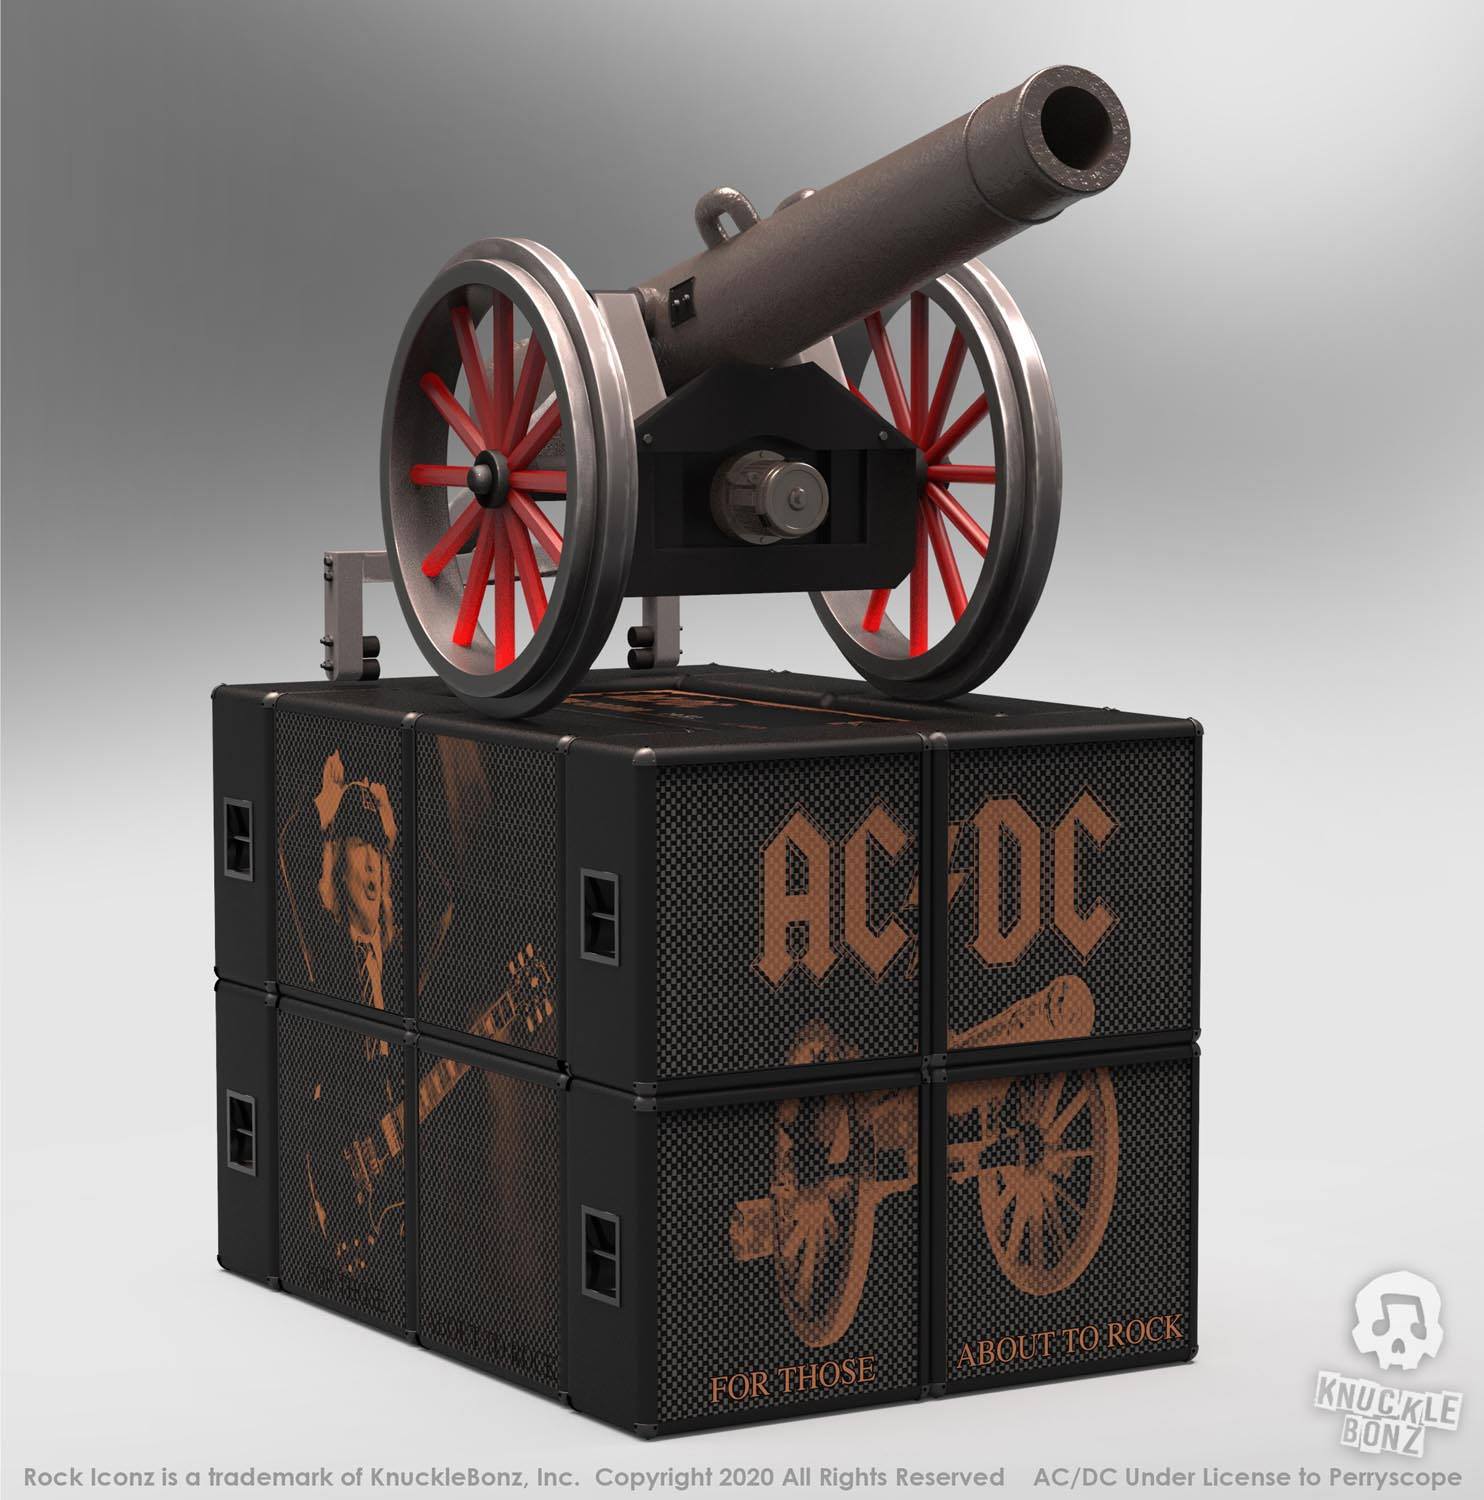 AC/DC Rock Ikonz On Tour Statues Cannon For Those About to Rock\